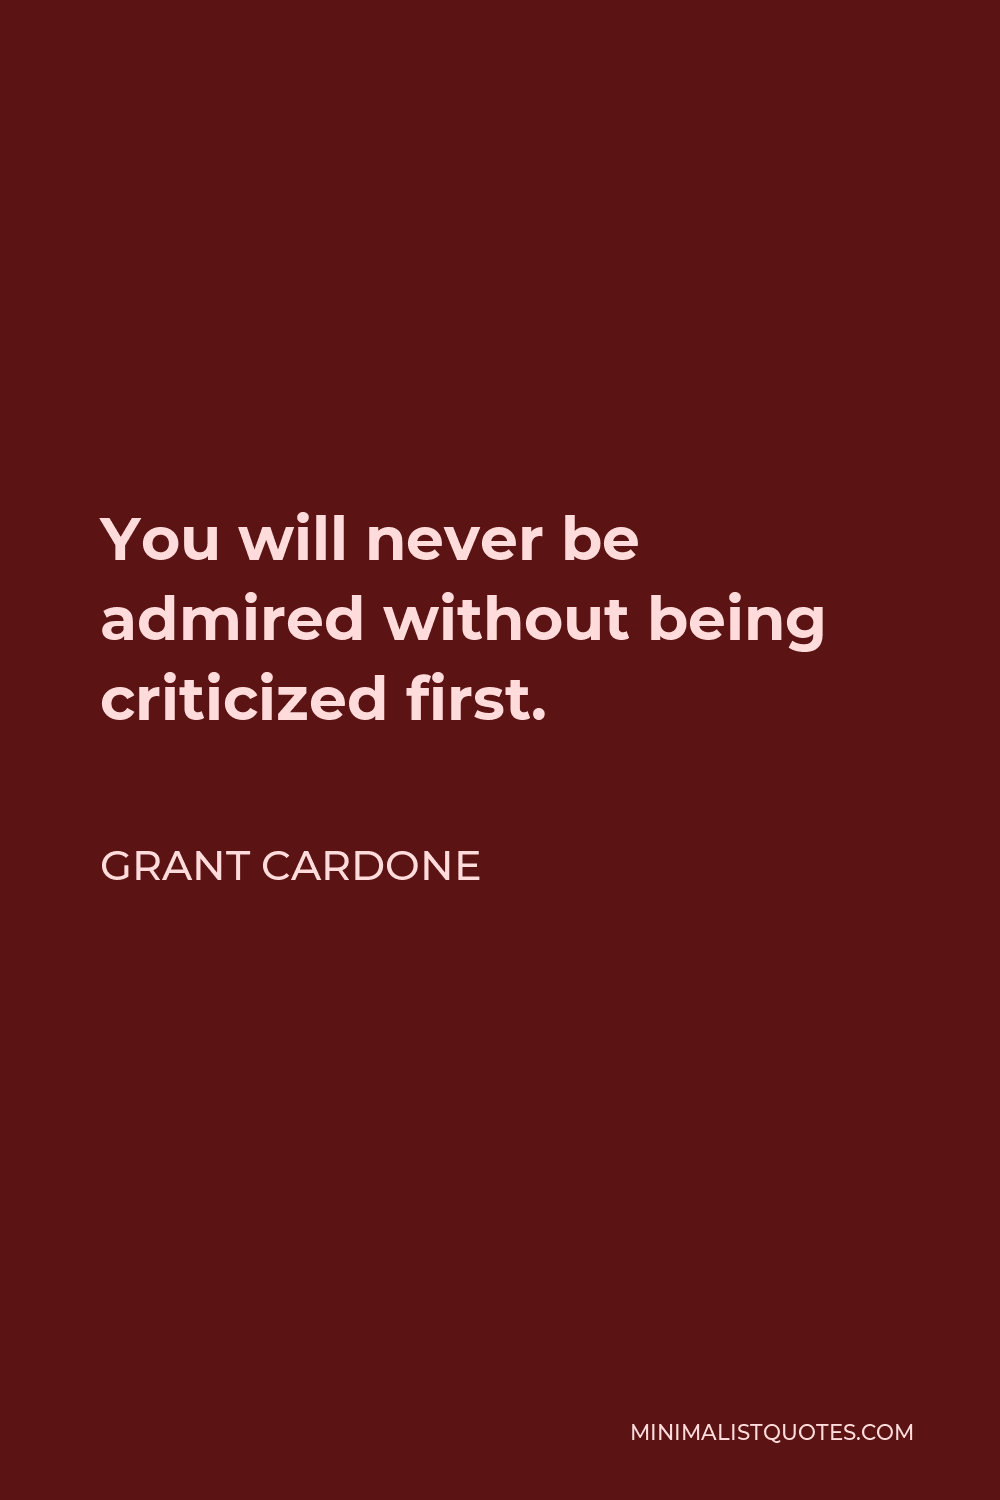 Grant Cardone Quote - You will never be admired without being criticized first.